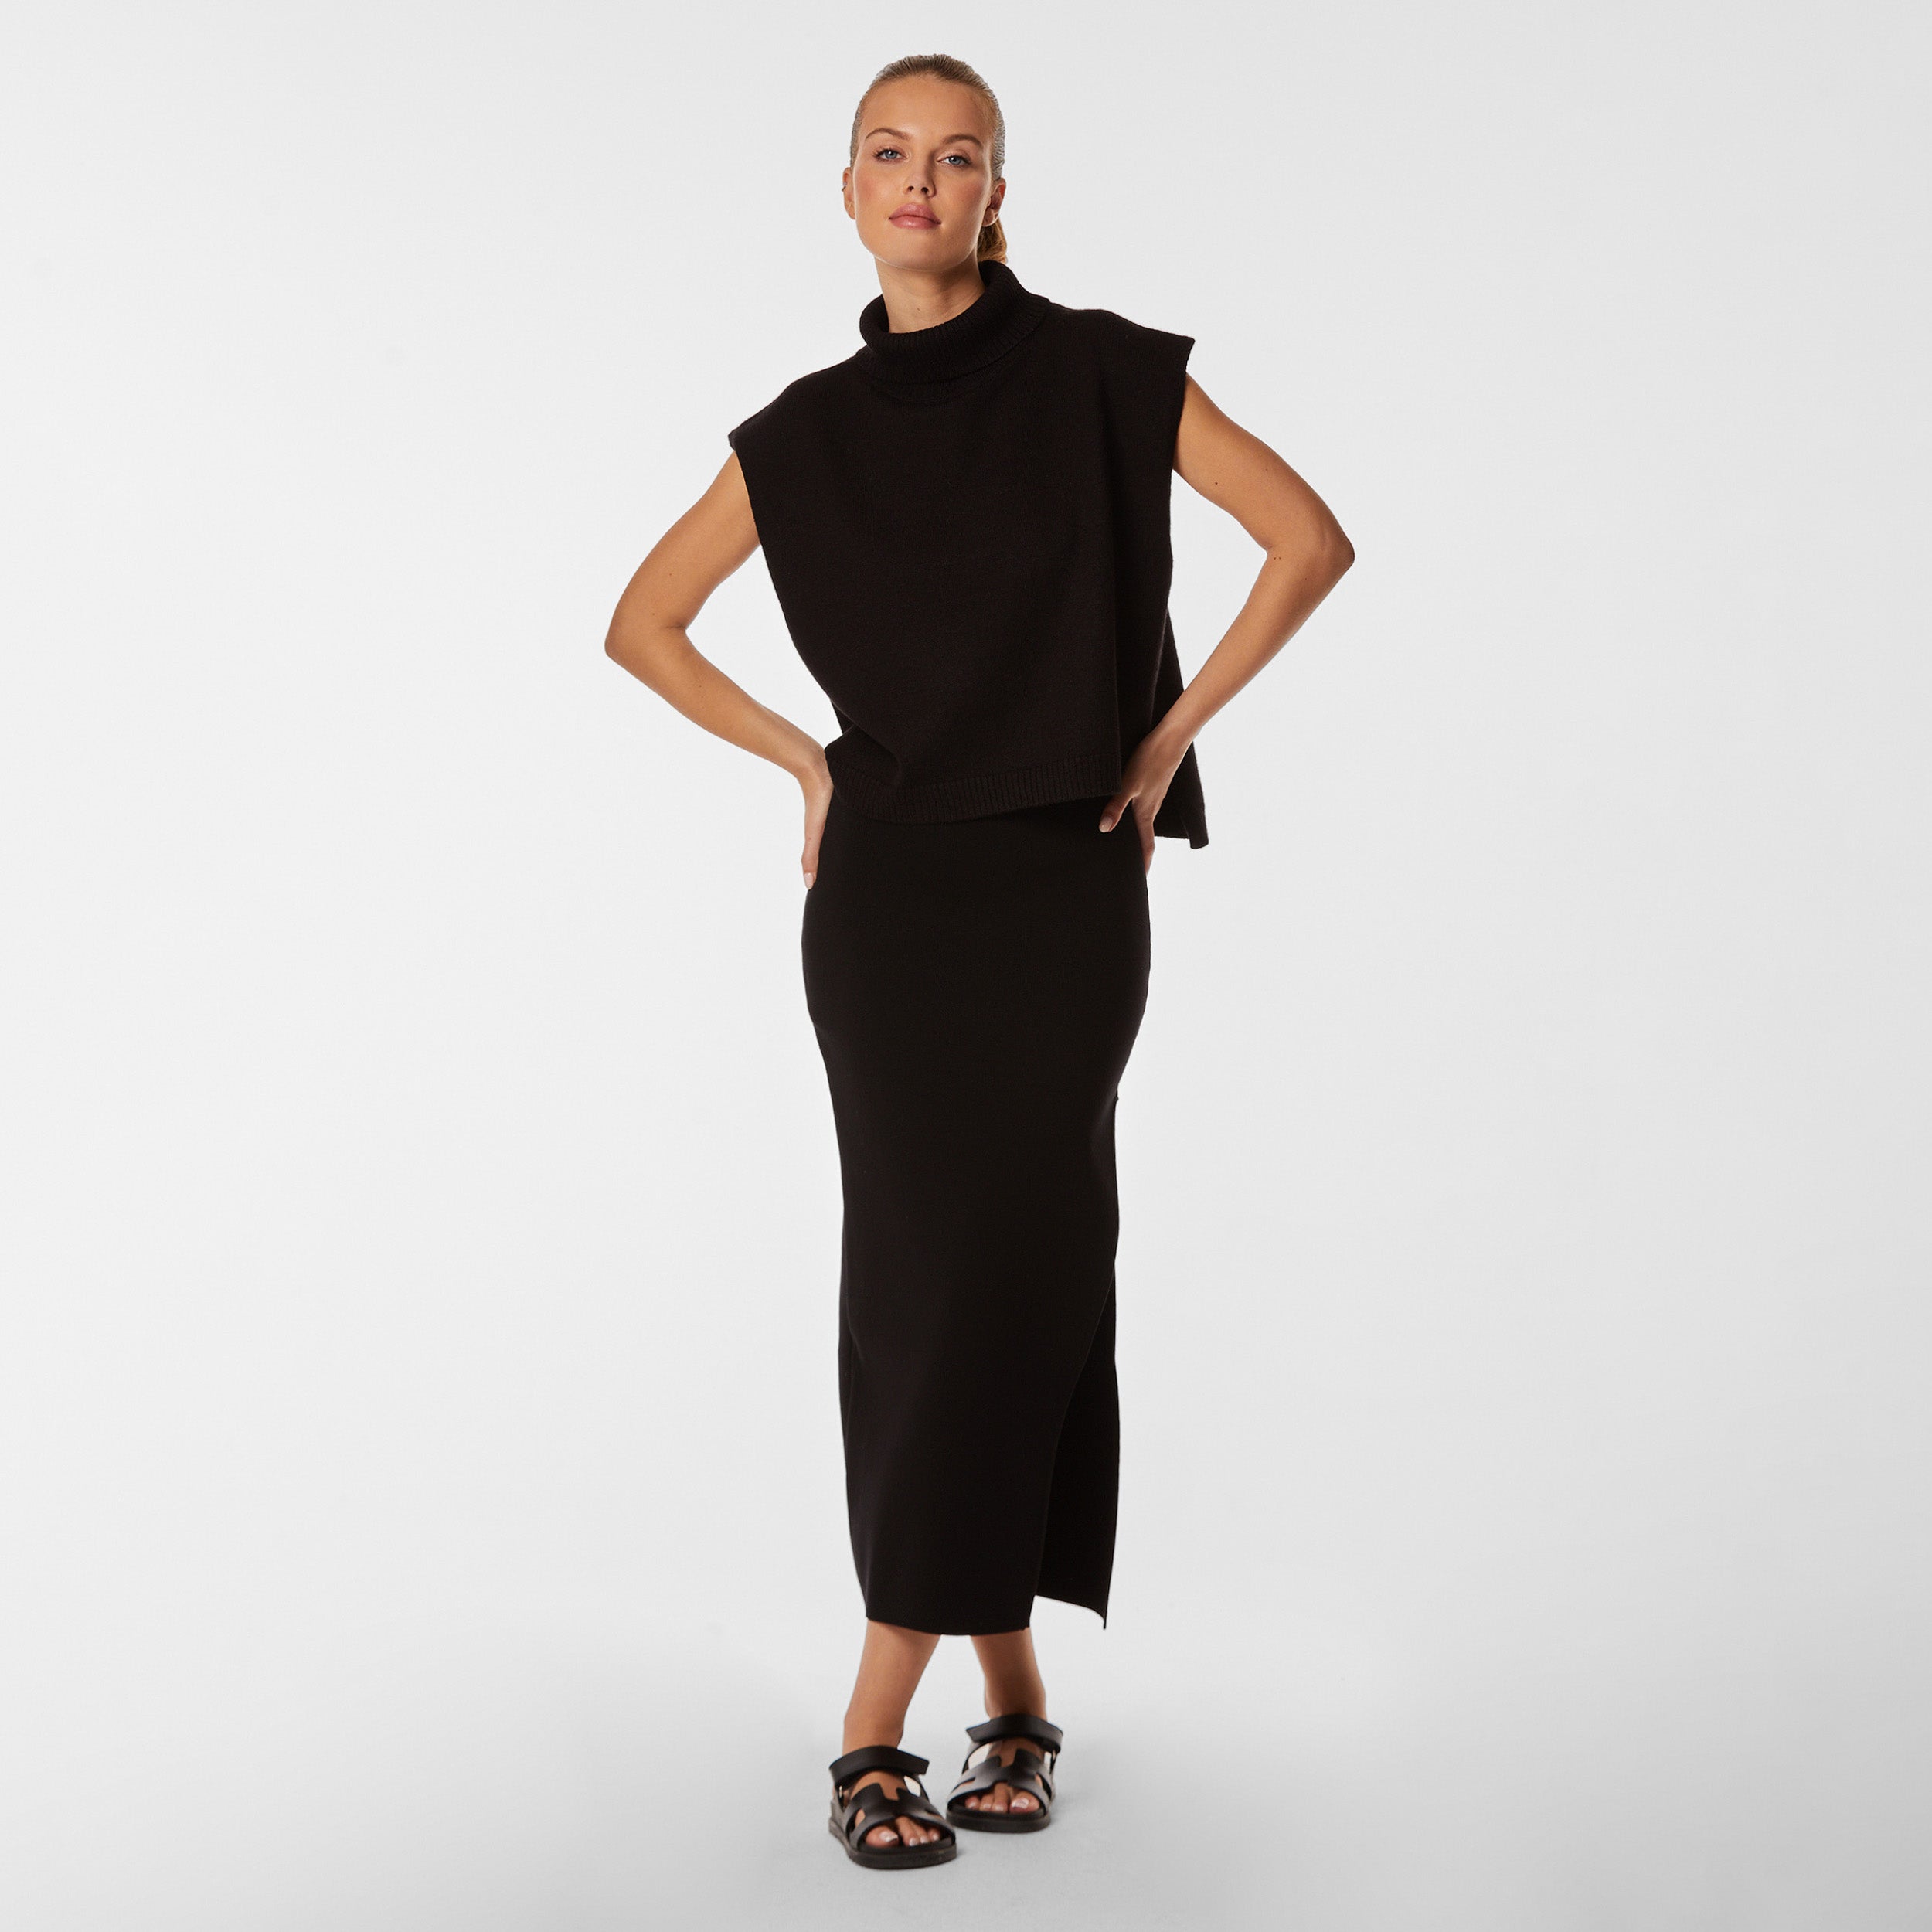 Full body front view of woman wearing sleeveless black sweater and black midi skirt